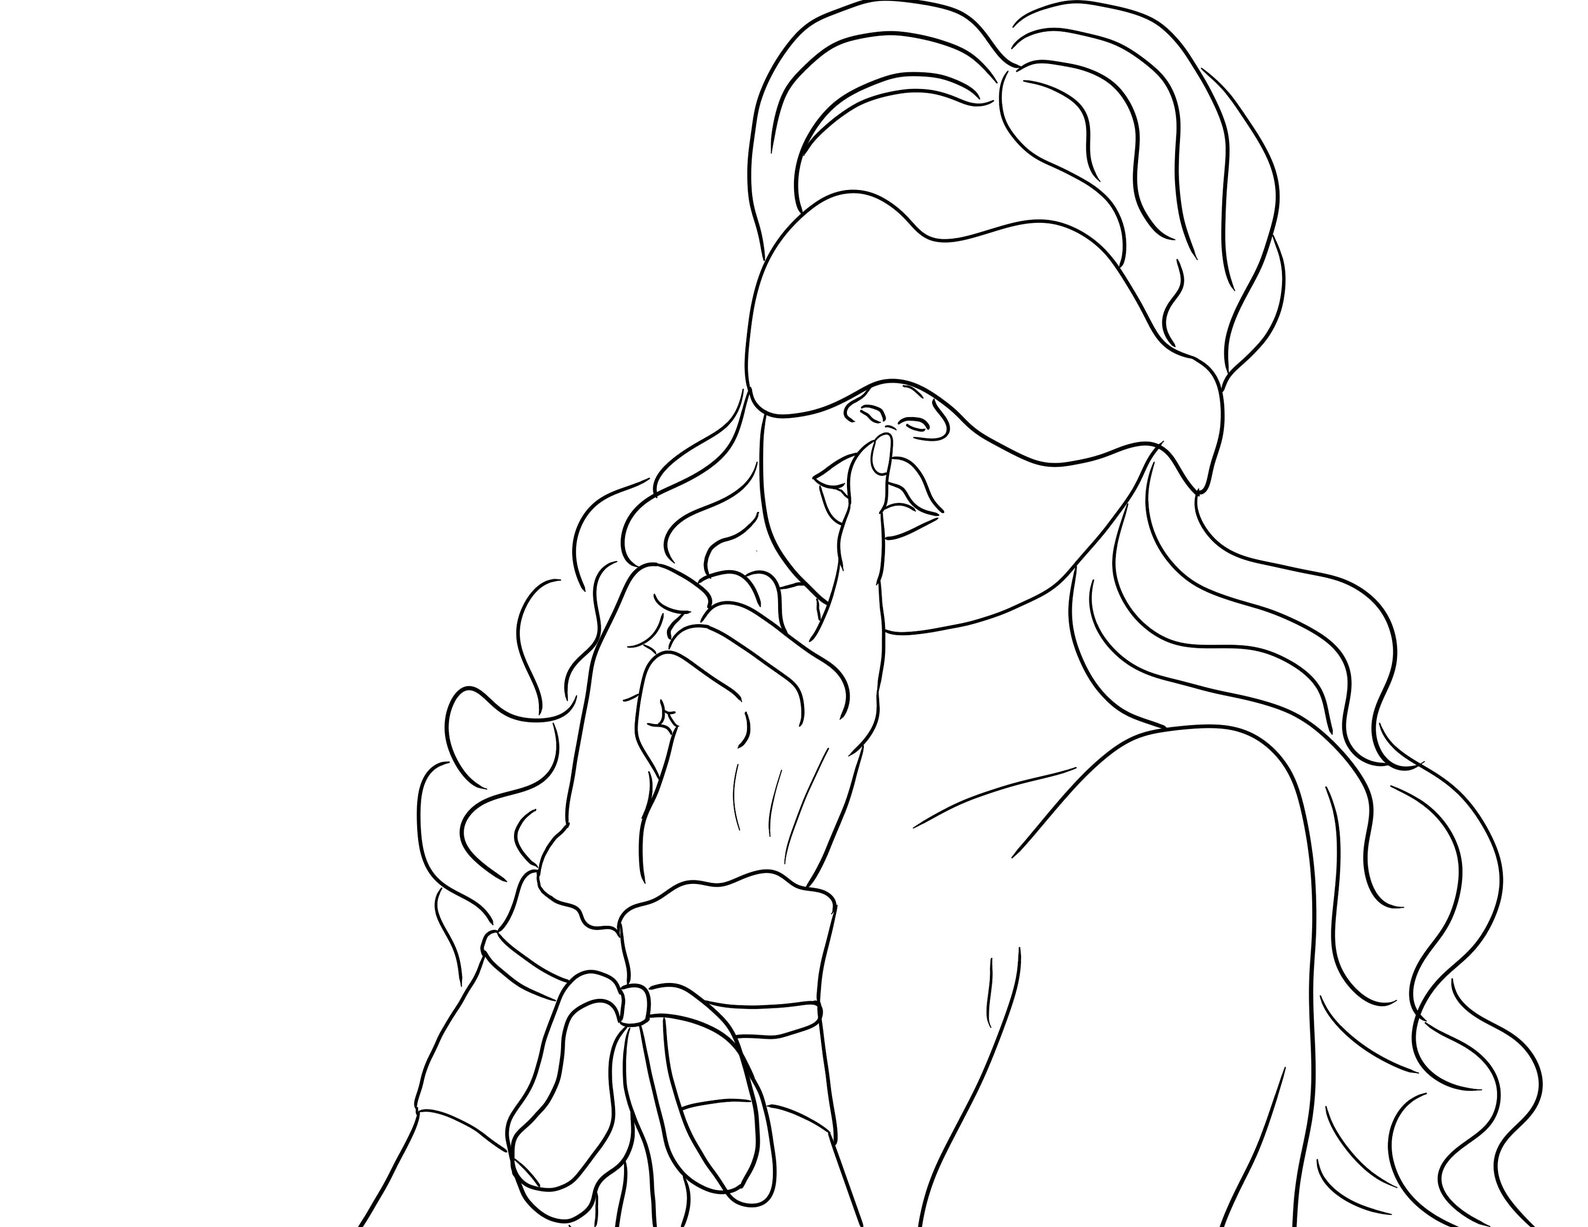 Erotic Coloring Page Adult Coloring Page Bdsm Coloring Etsy